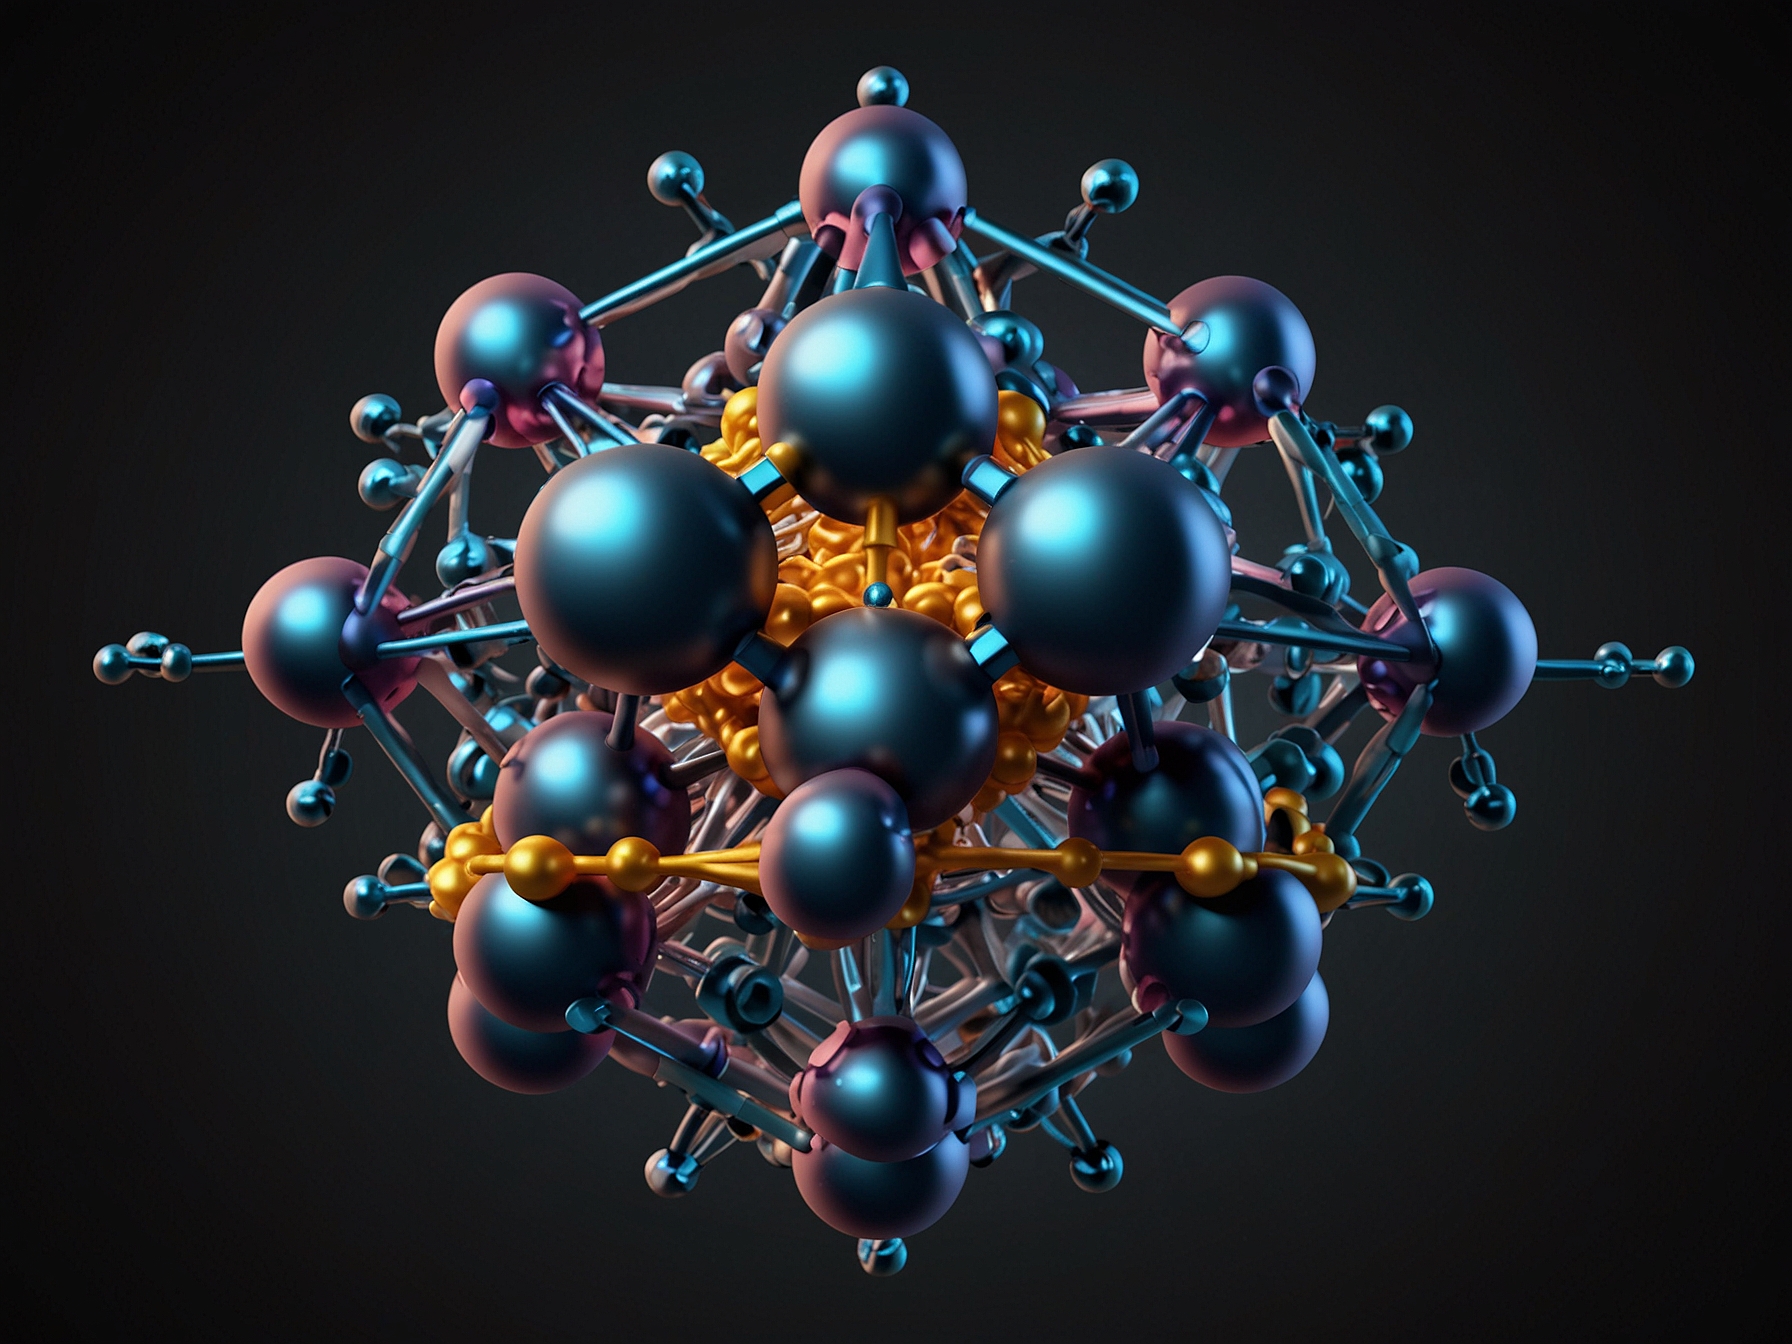 Diagram of La4H23's molecular structure highlighting the 23 hydrogen atoms and 4 lanthanum atoms arrangement, crucial for its superconductivity under 1.2 million atmospheres.